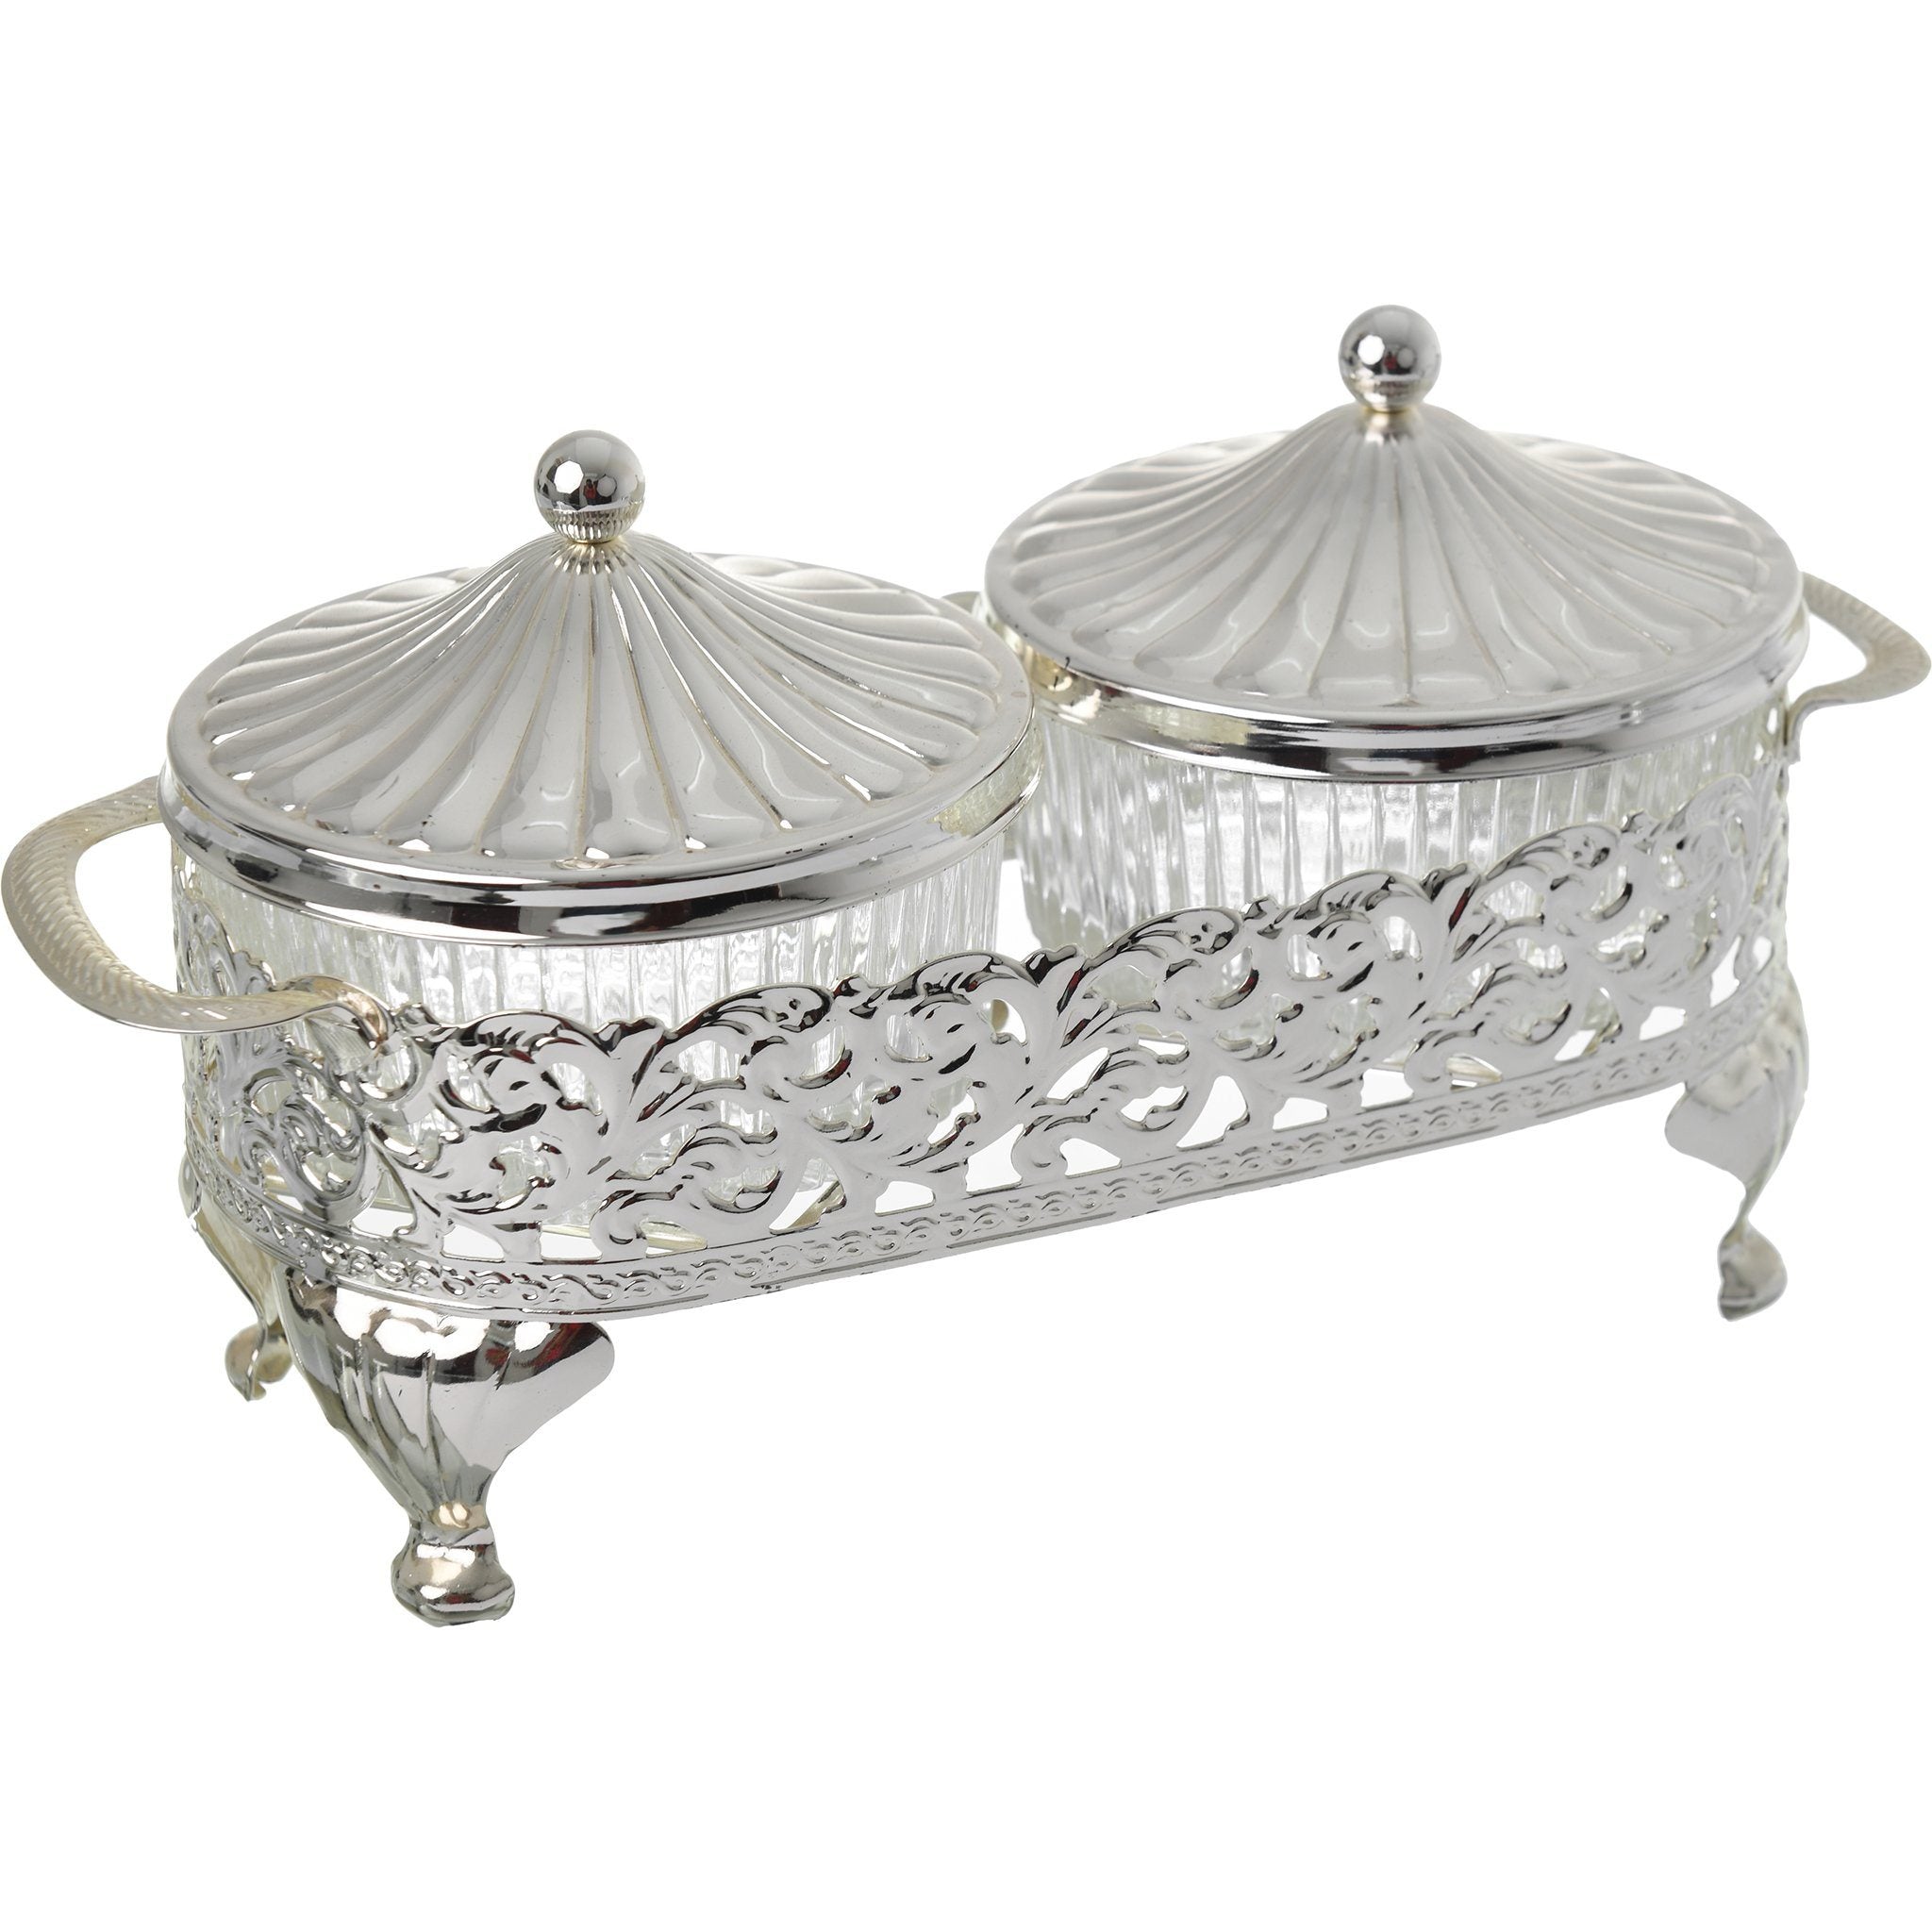 Queen Anne - Round Bowl Set with Silver Plated Stand 2 Pieces - Silver Plated Metal & Glass - 23x11cm - 26000329